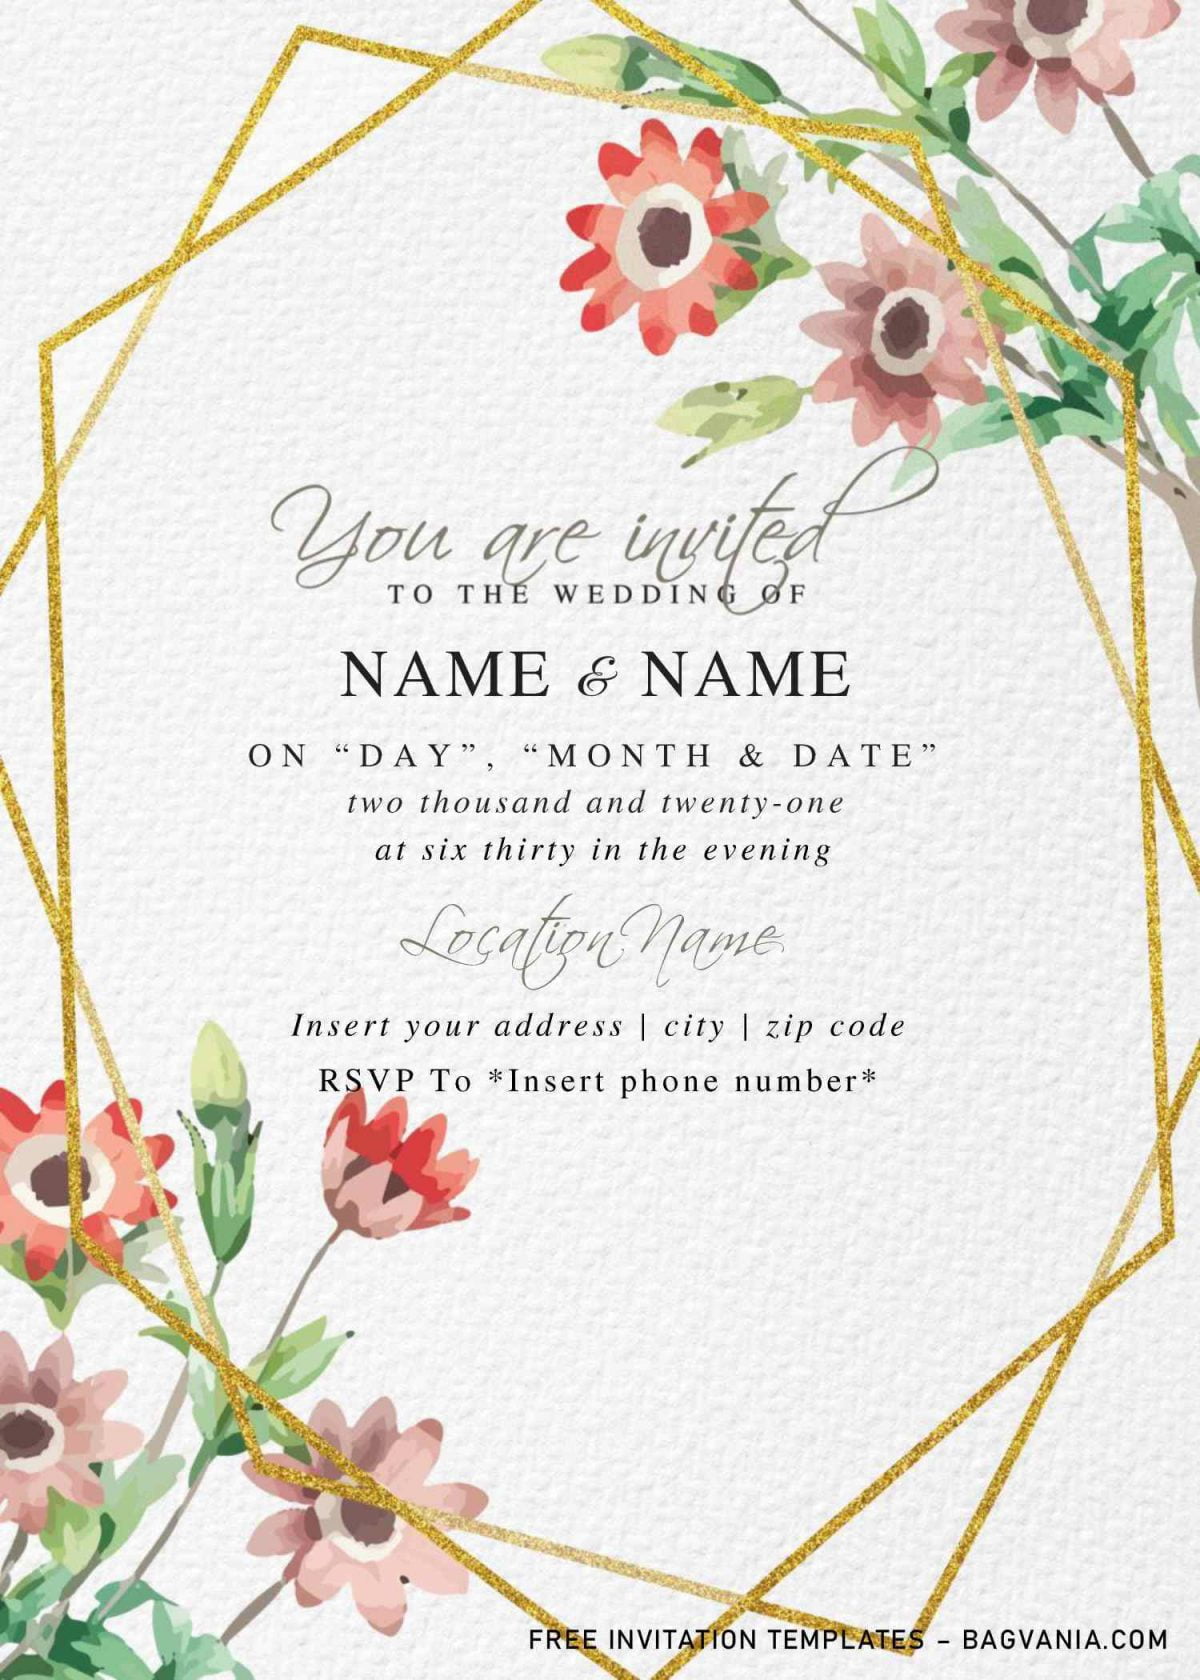 Free Botanical Floral Wedding Invitation Templates For Word and has gold geometric pattern